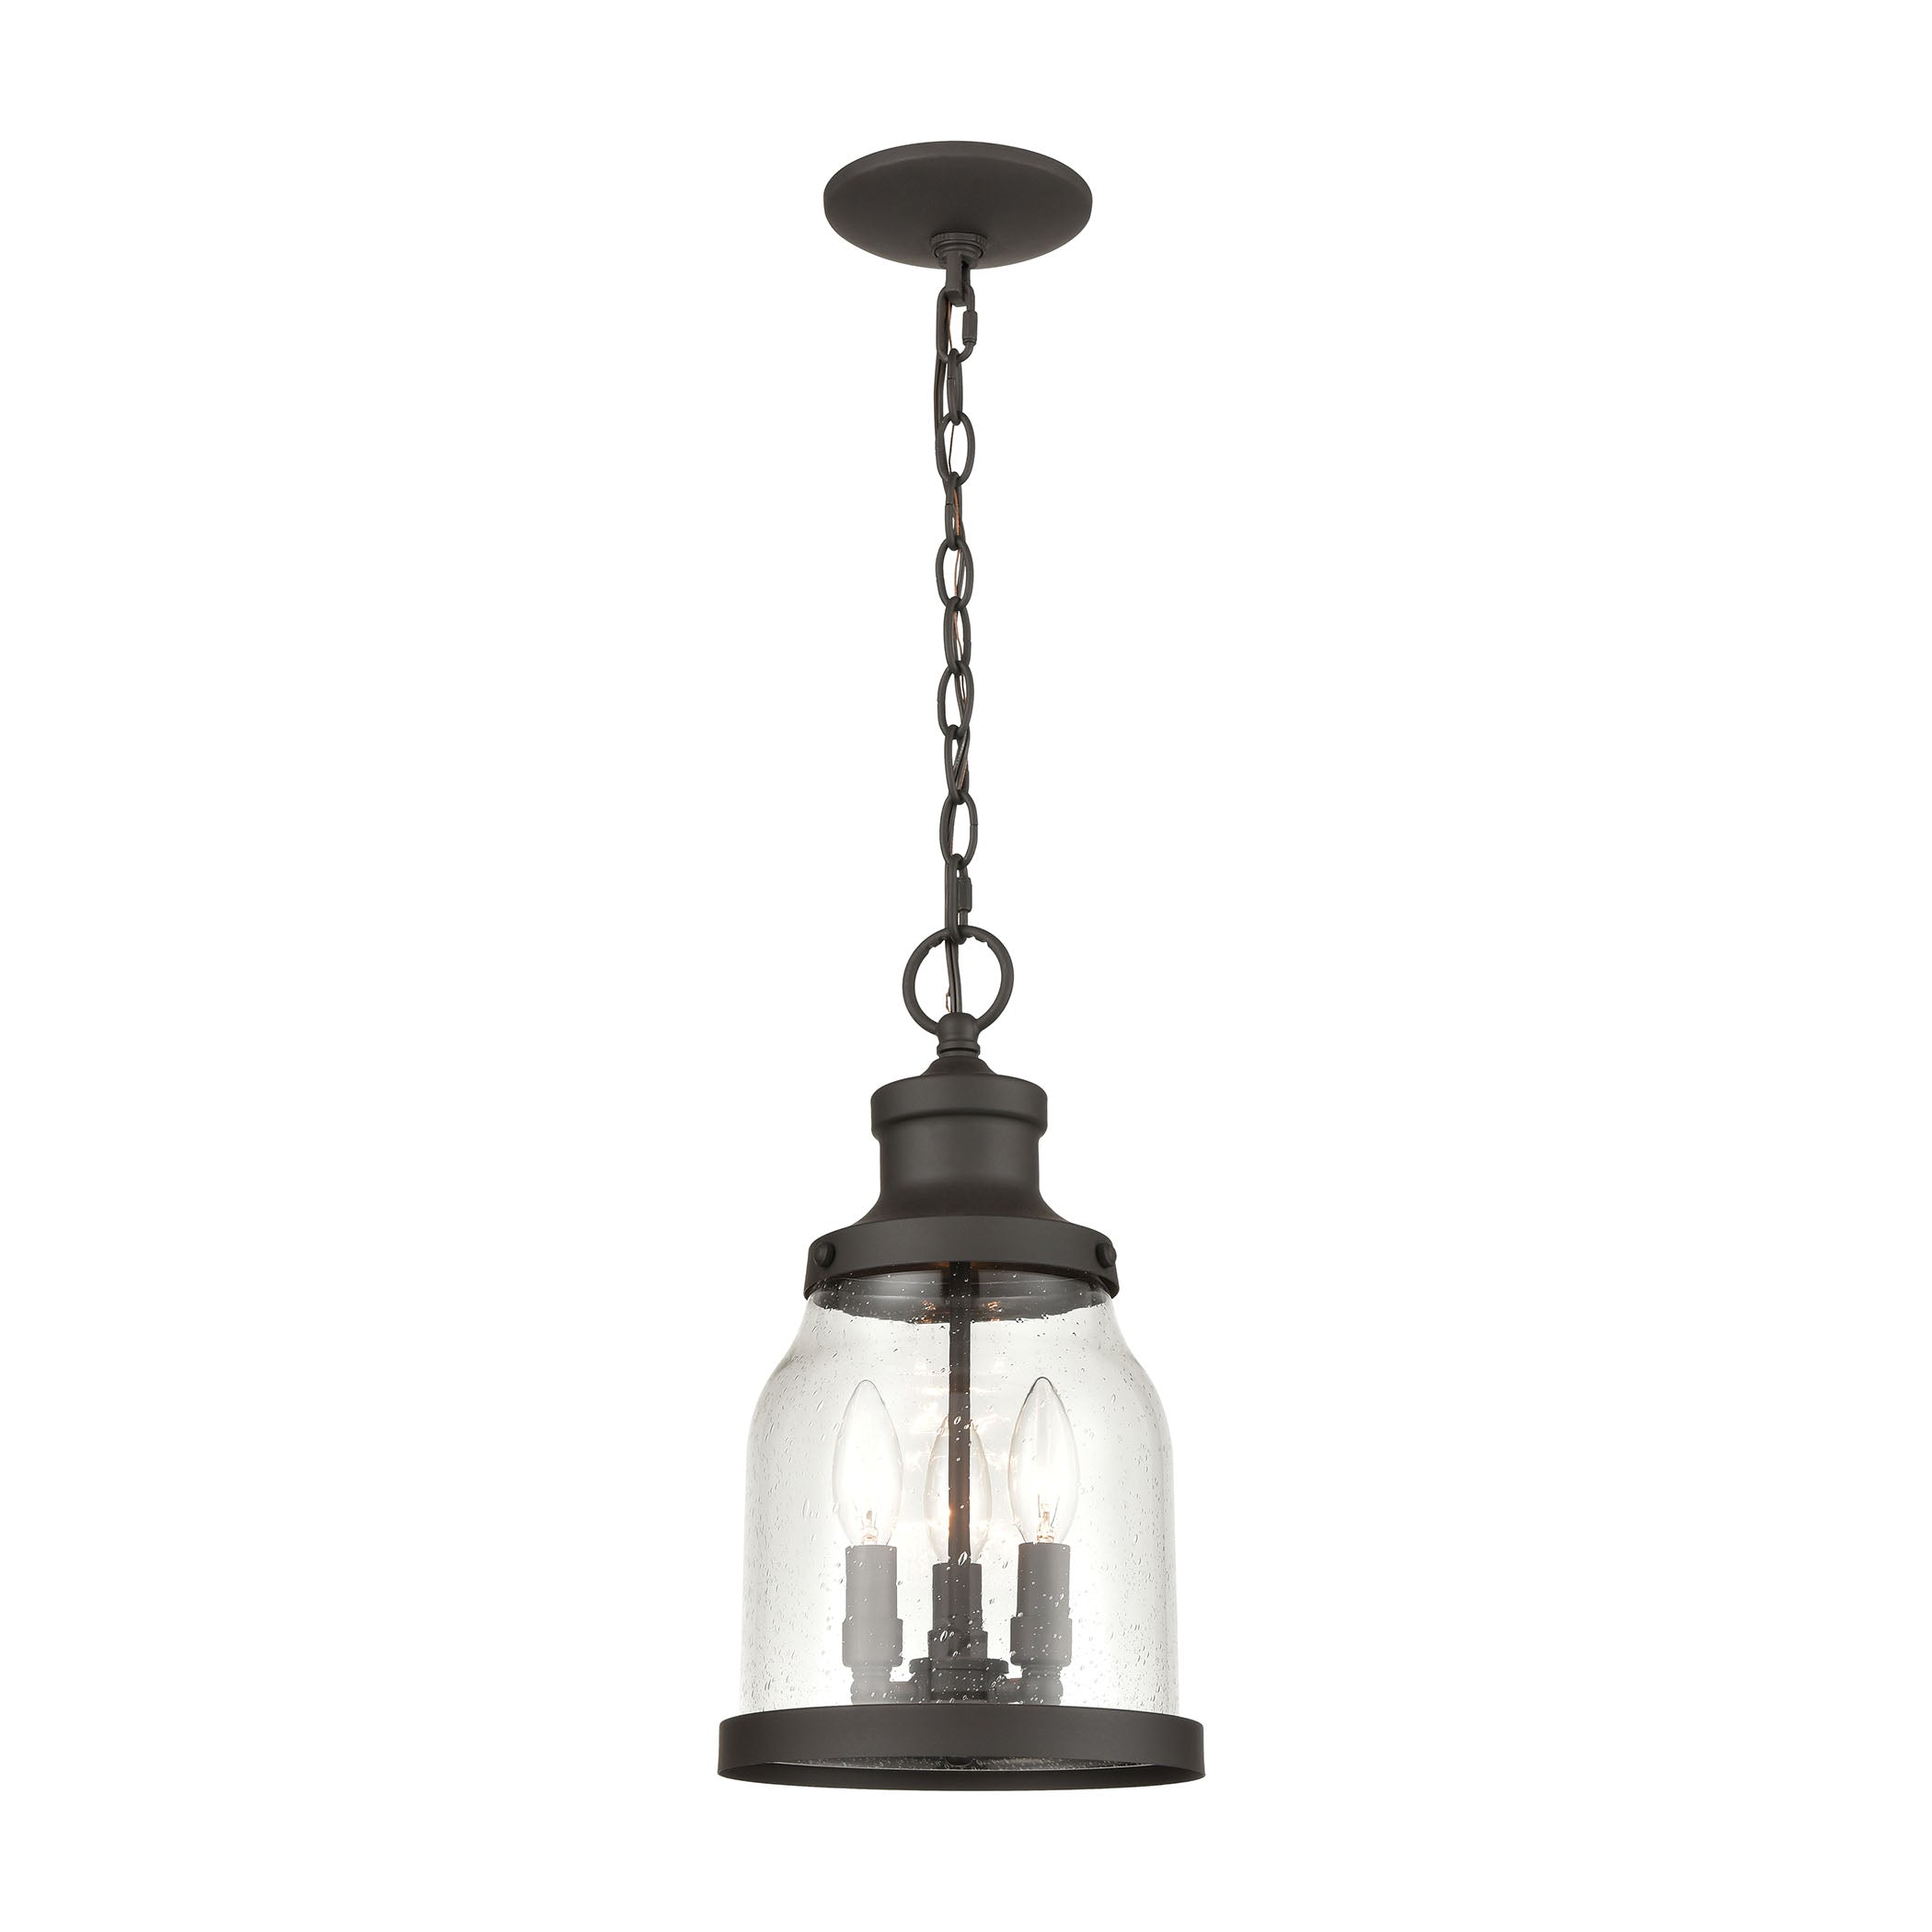 ELK Lighting 45423/3 Renford 3-Light Outdoor Pendant in Architectural Bronze with Seedy Glass